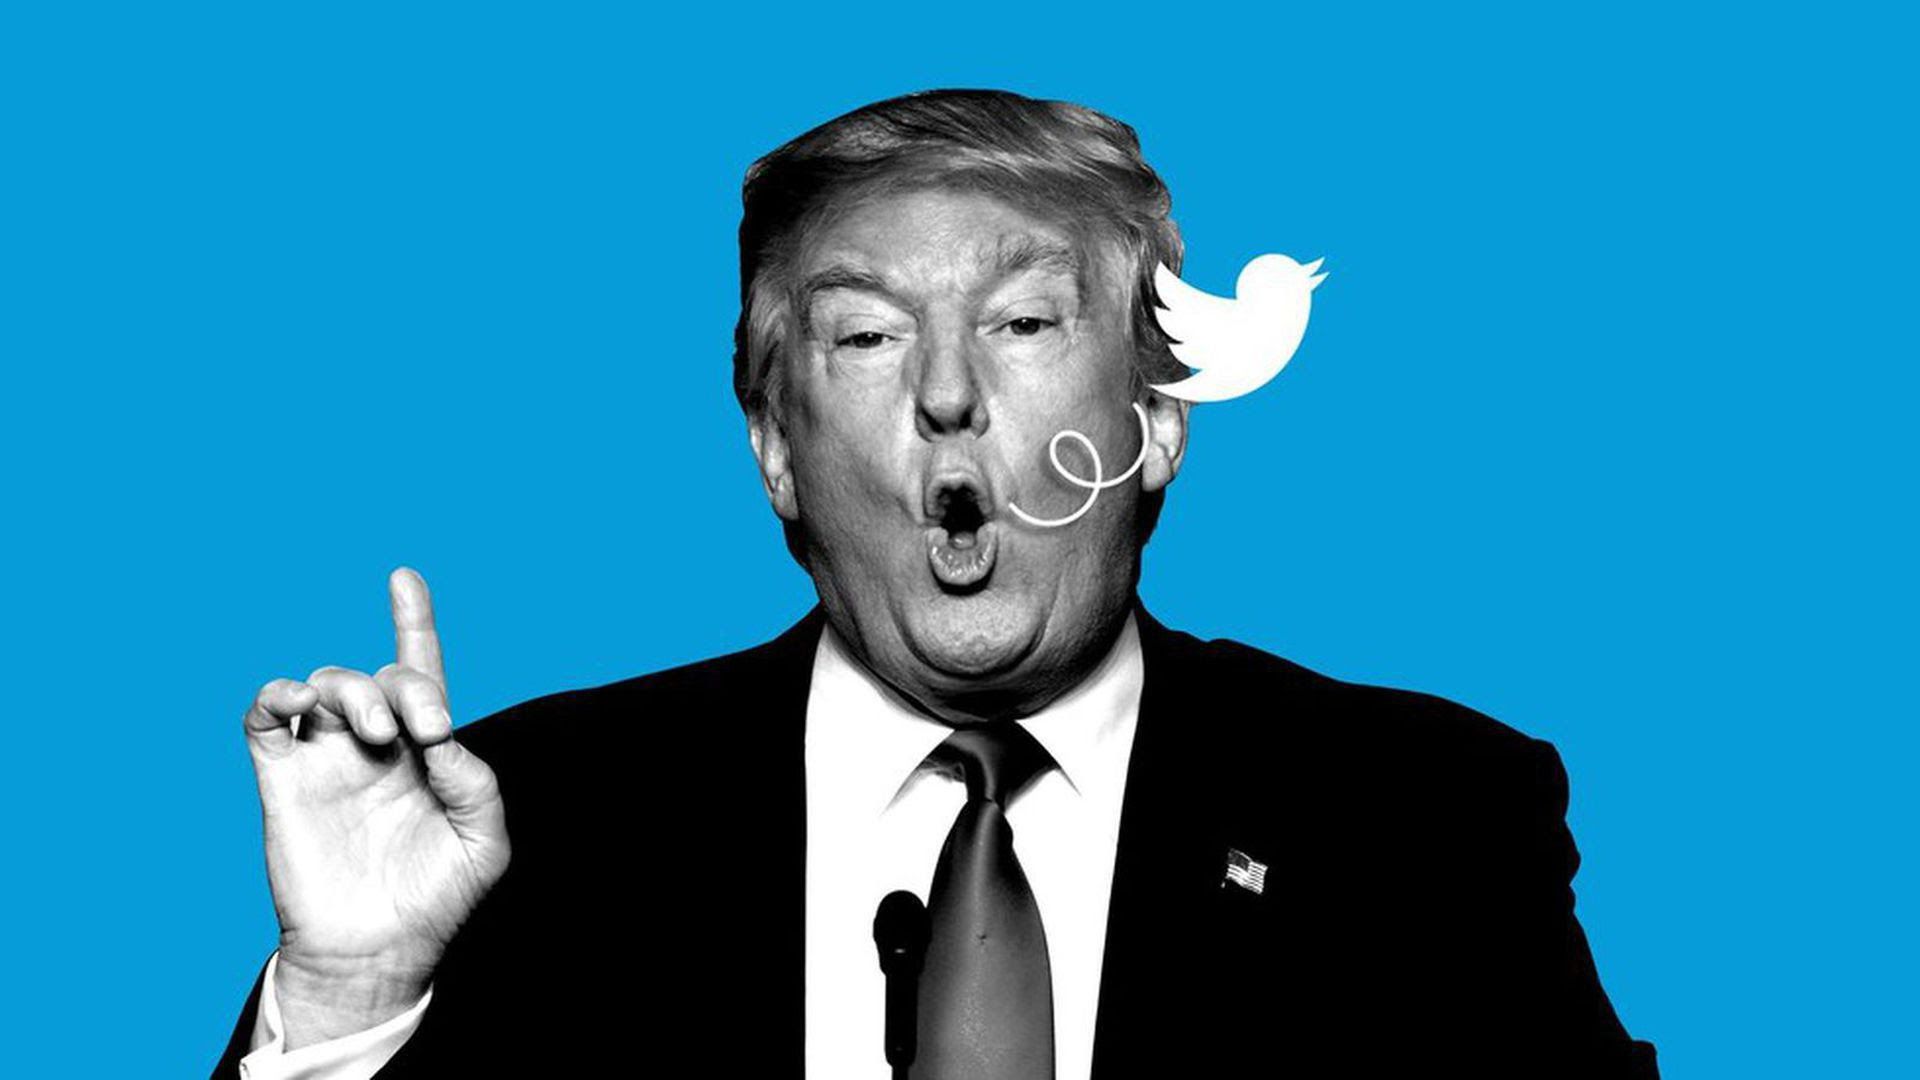 Illustration of the Twitter bird logo coming out of President Trump's mouth as he speaks